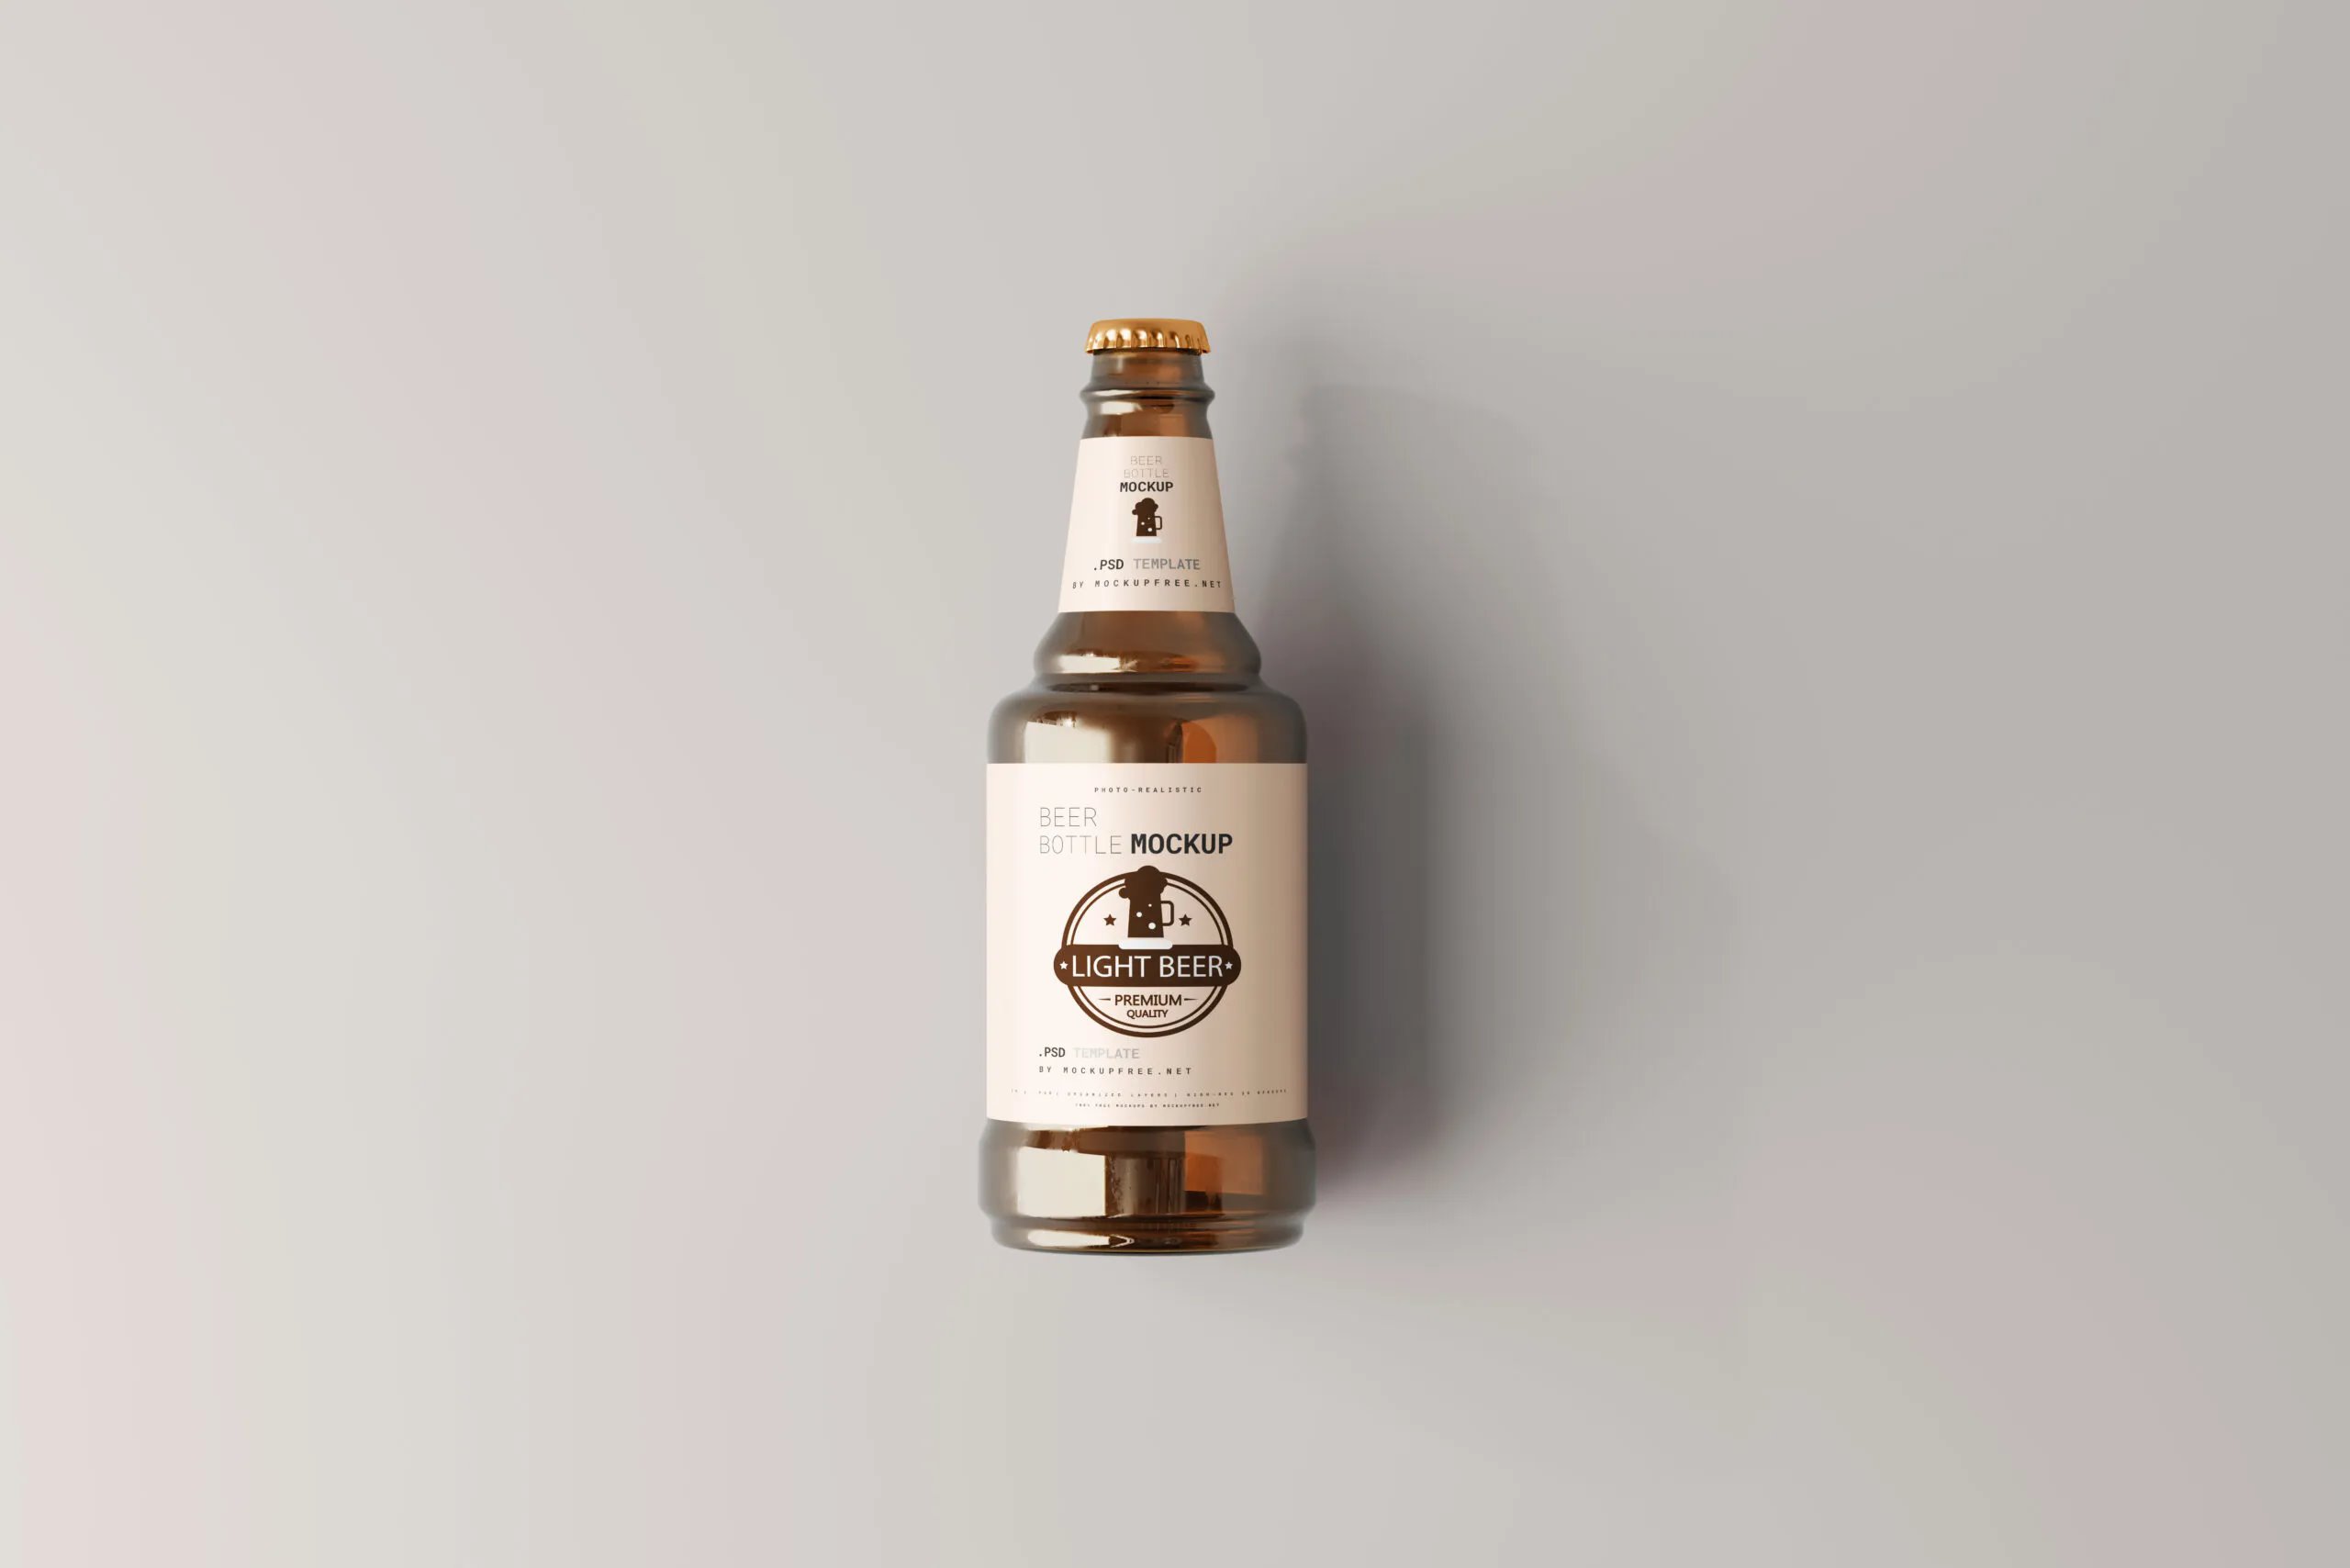 5 Stubby Beer Bottle Mockups in Different Visions FREE PSD